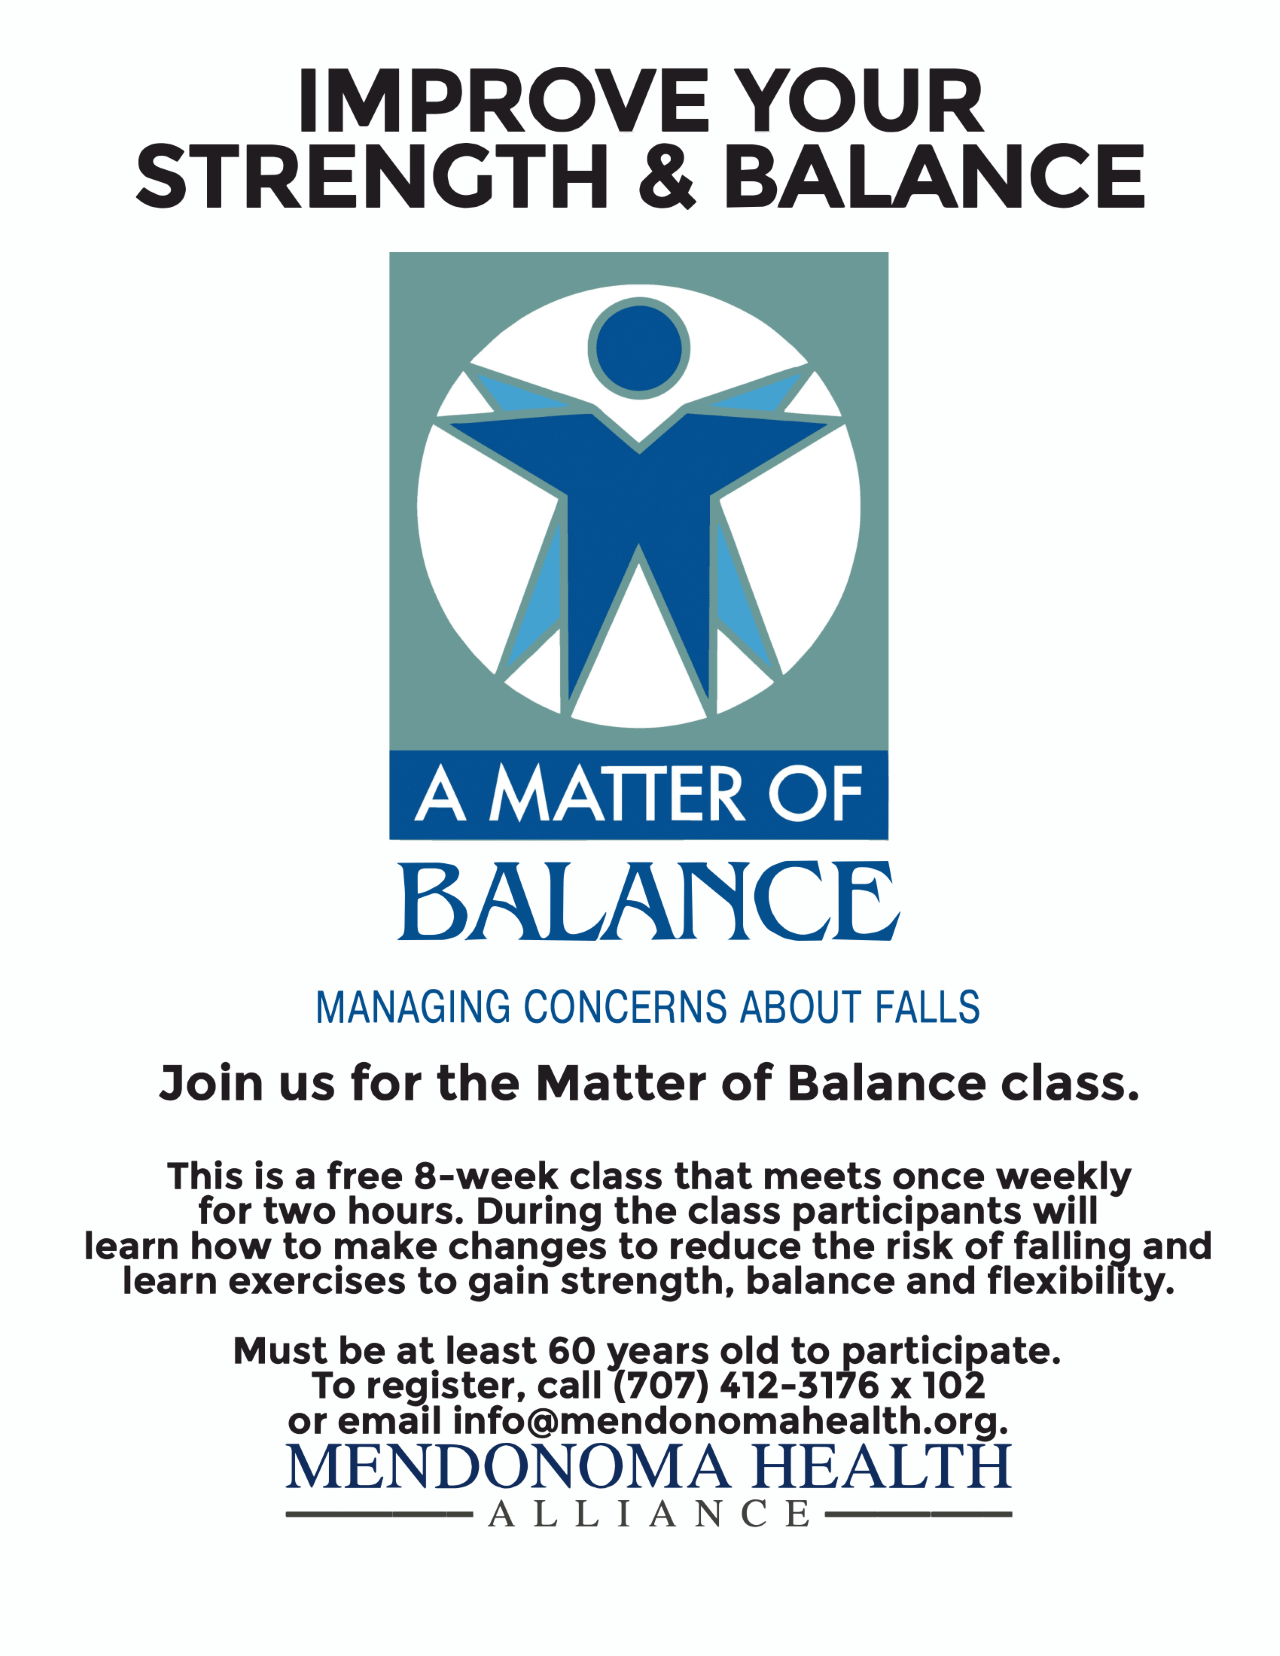 Matter of Balance Flyer with logo of an artistic star shaped human stretching